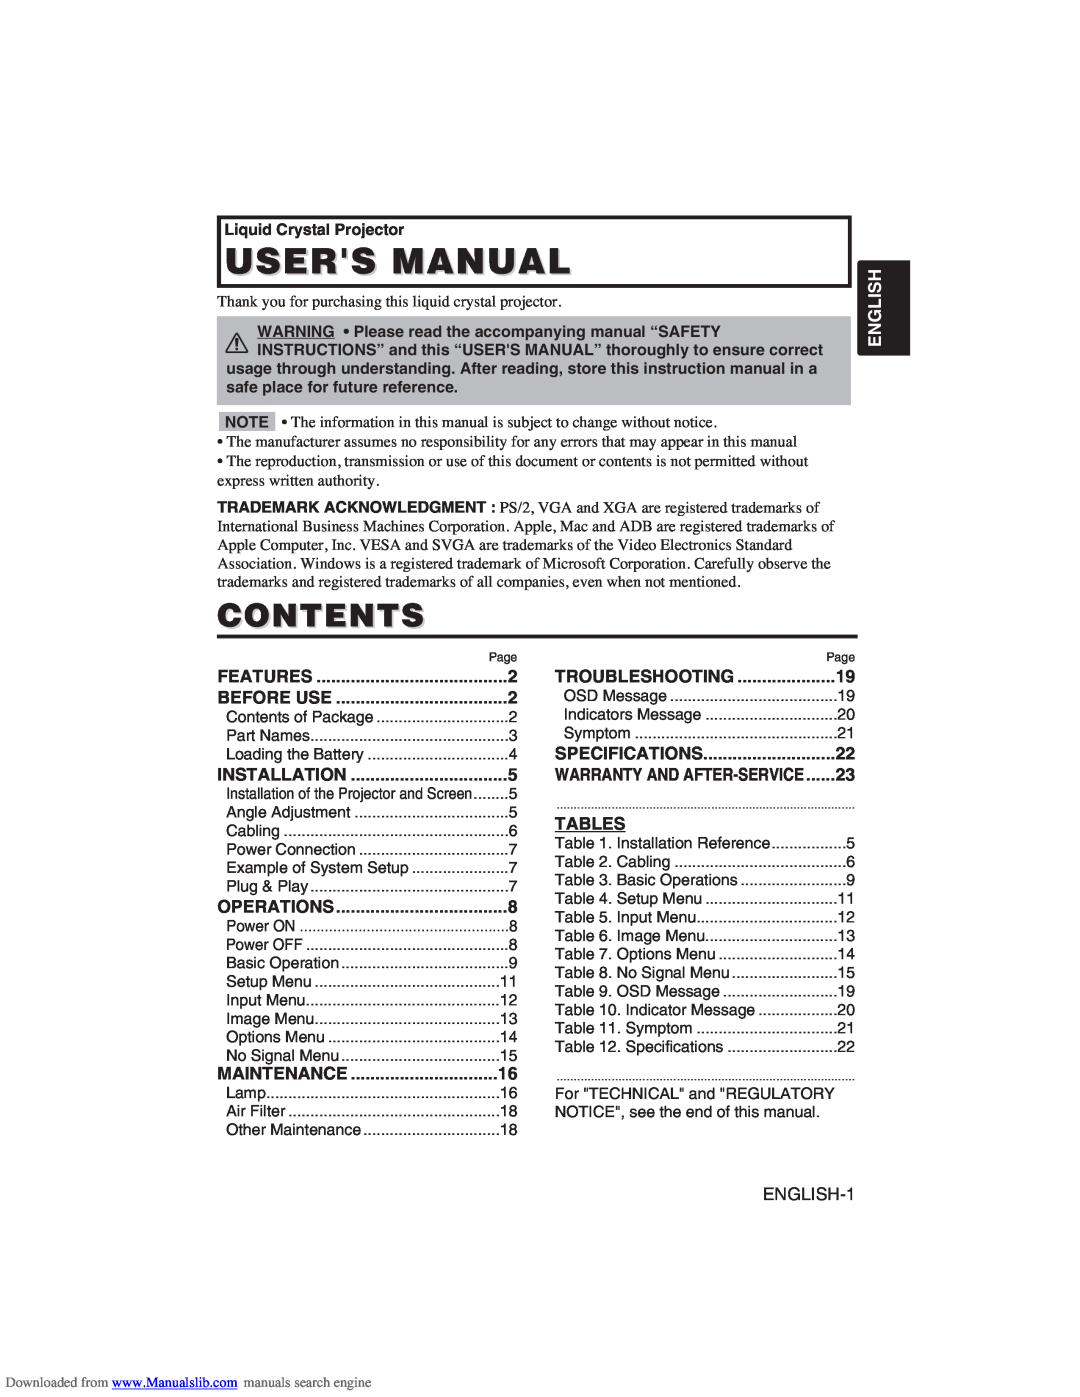 Hitachi CP-X275W user manual Users Manual, Contents, Tables, English 